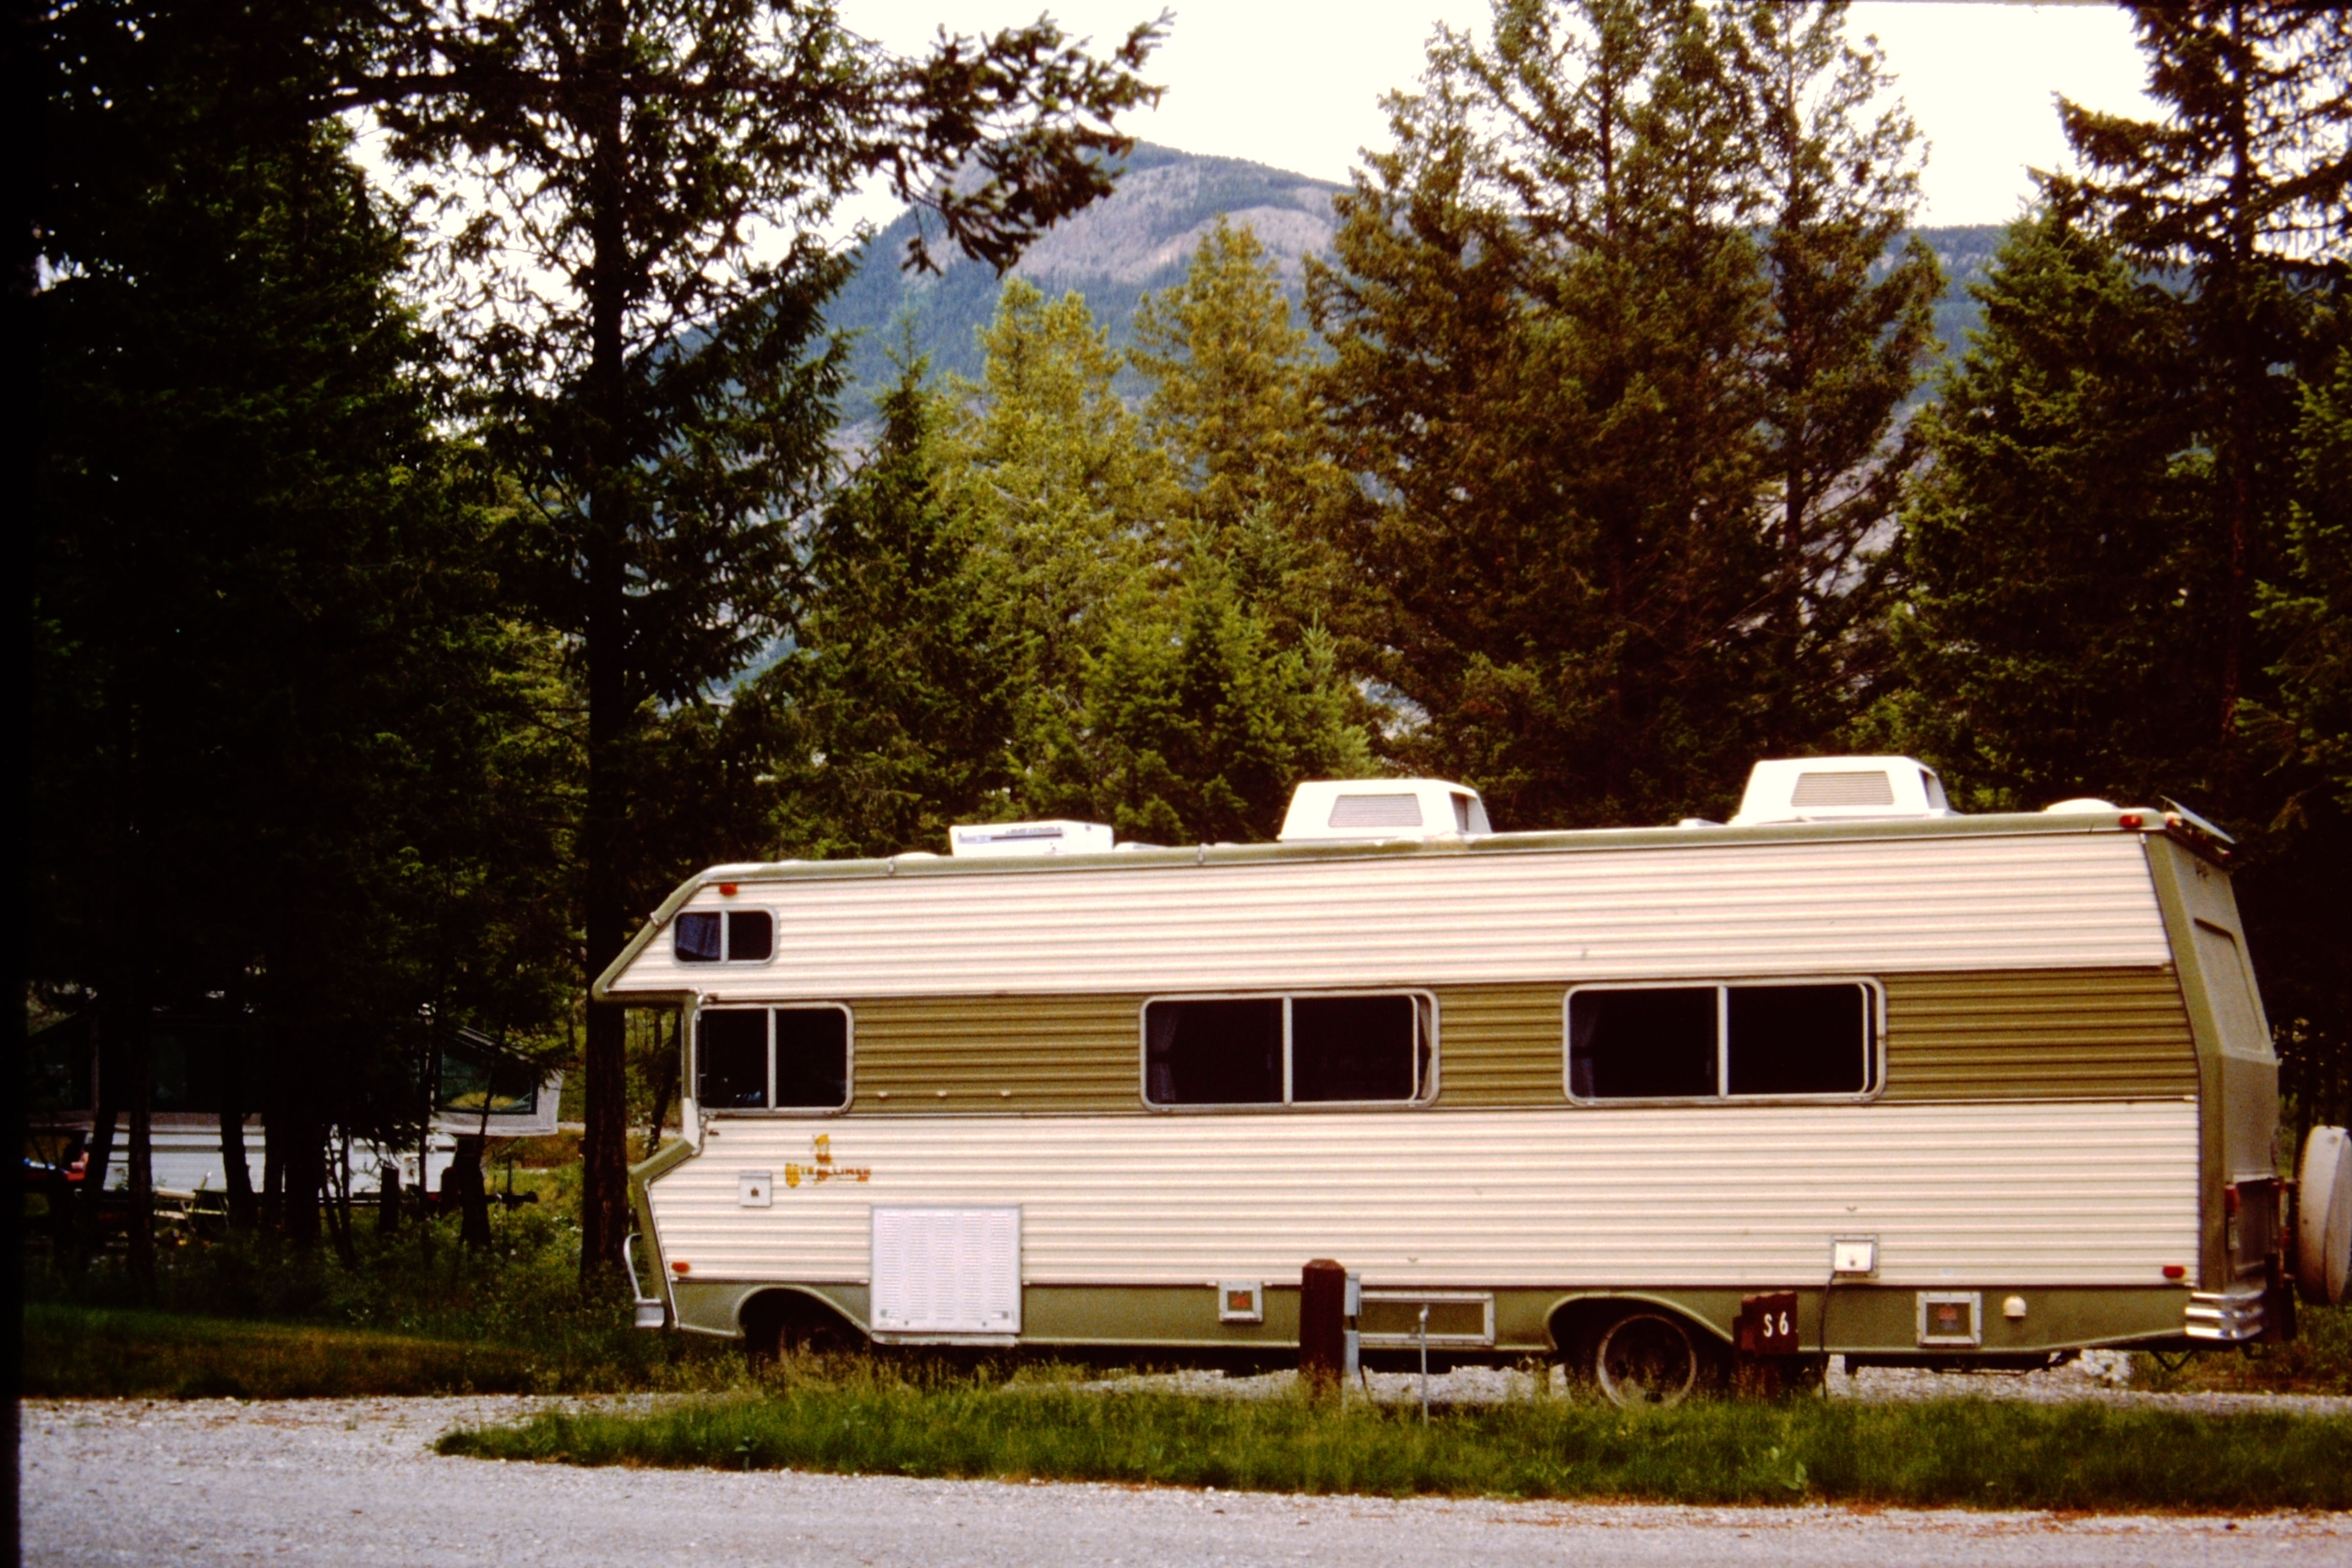 Old motorhome parked in campsite with mountains in the distance.